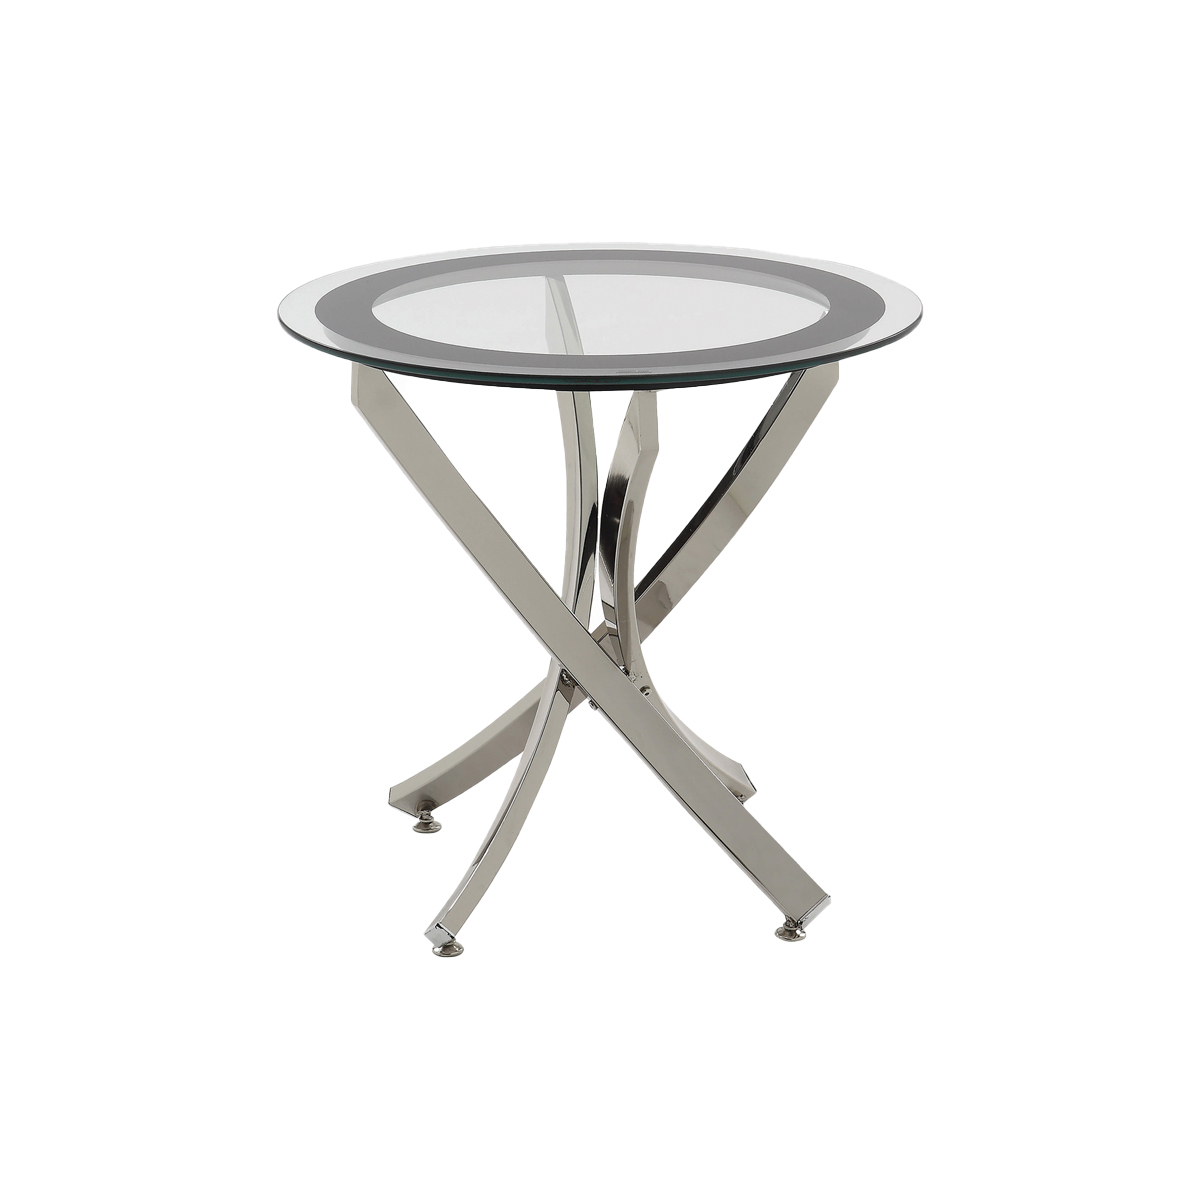 Round Tempered Glass Top End Table With Curved Metal Legs, Silver And Clear- Saltoro Sherpi